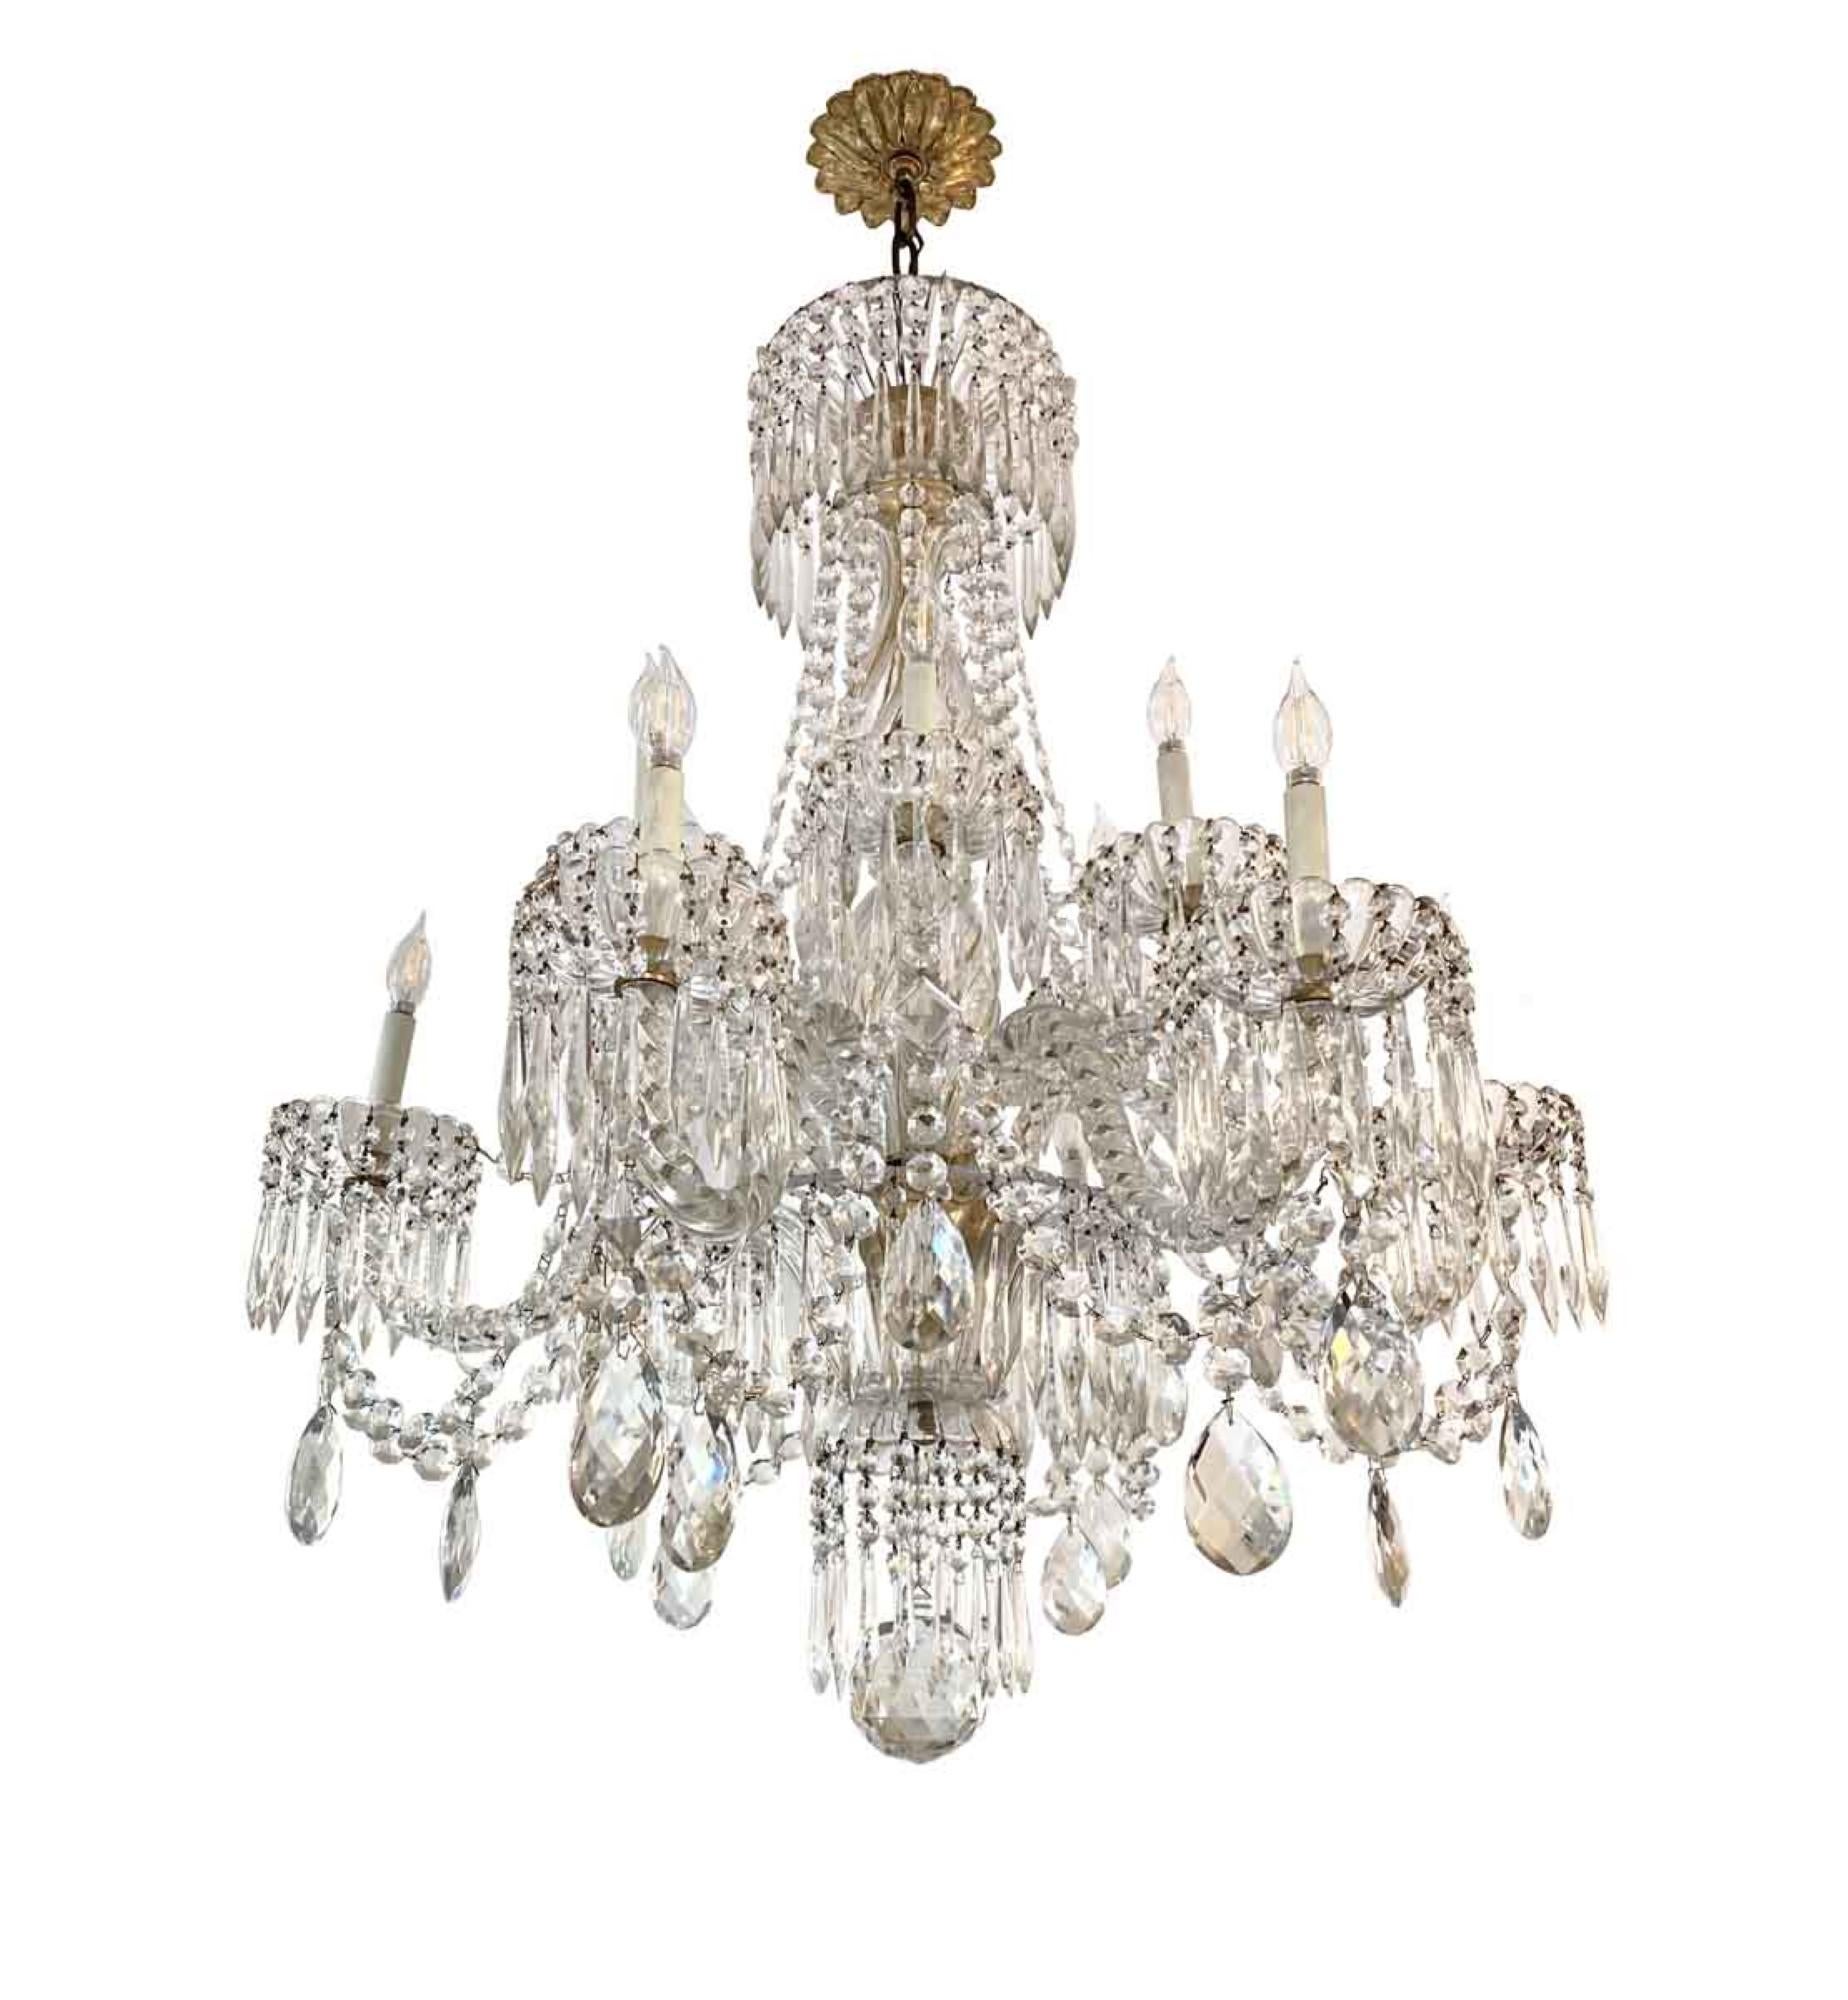 12-light Baccarat clear crystal chandelier, circa 1920. The body, arms, and bobeche are genuine Baccarat crystal. The hanging crystals are not and must have been replaced. This elegant chandelier is excellent quality. This can be seen at our 333